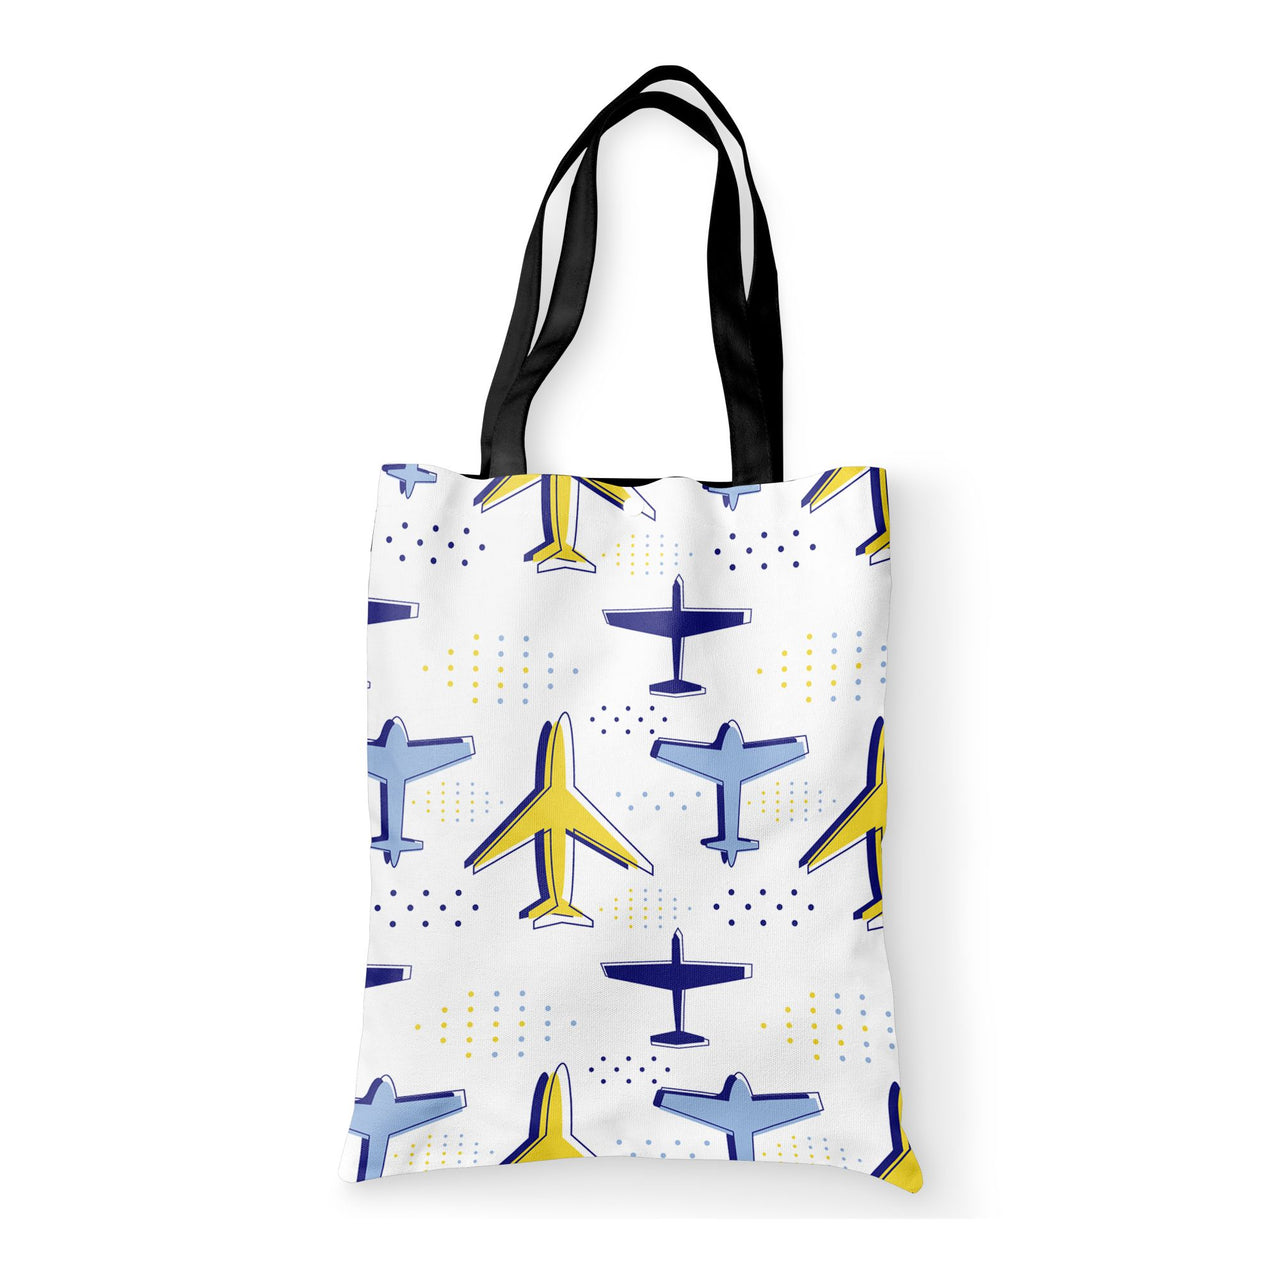 Very Colourful Airplanes Designed Tote Bags